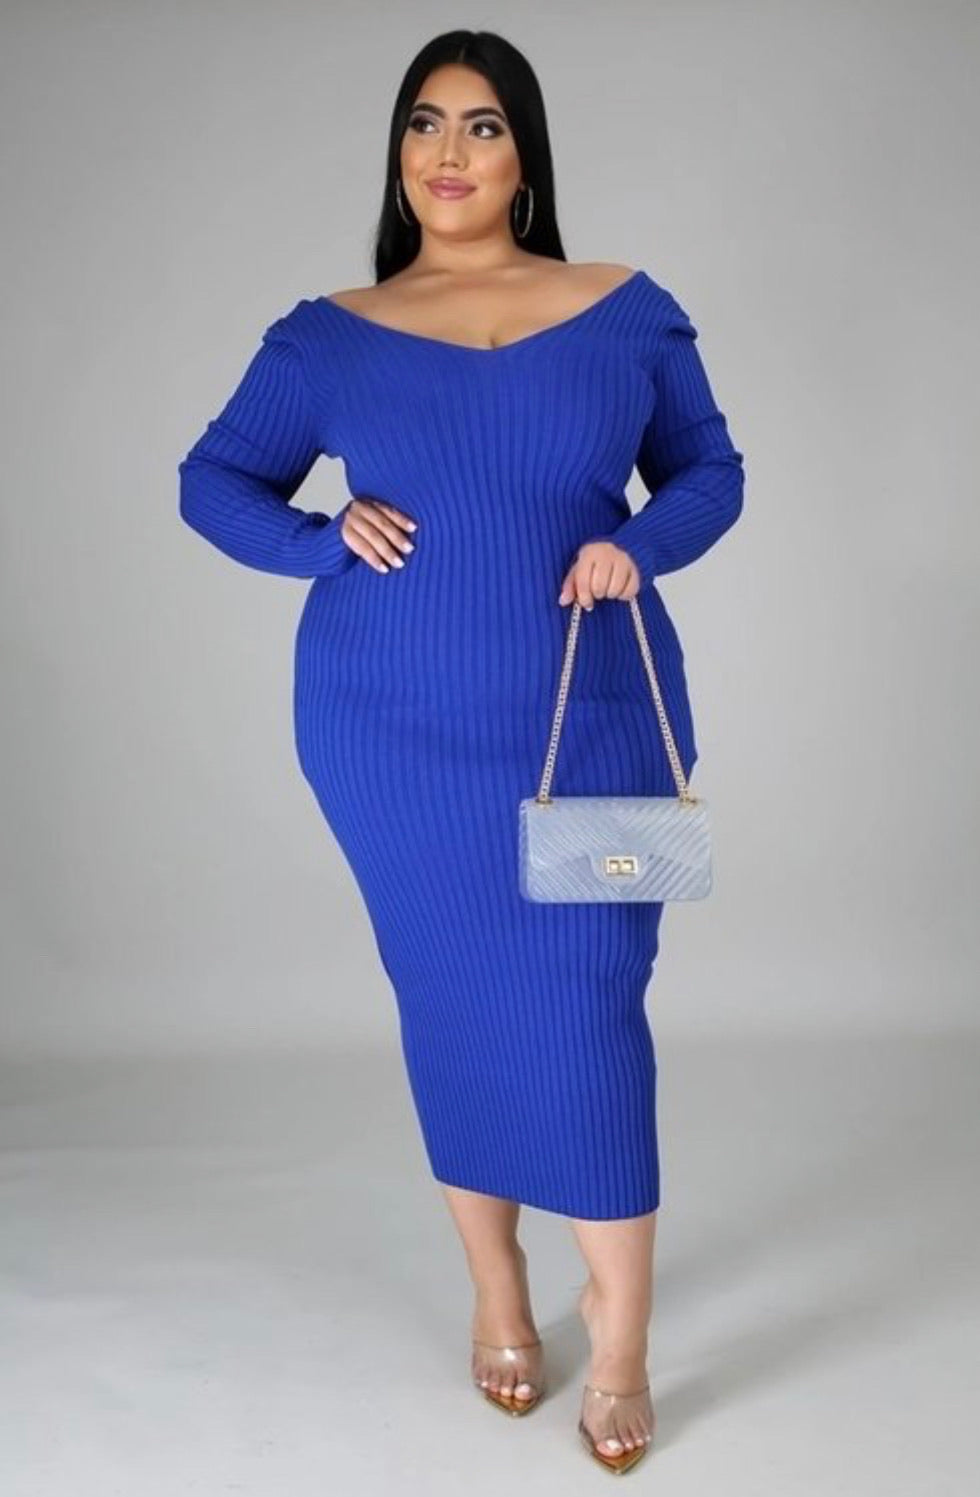 Covered & Classy in Blue - JohntinesBoutique.com